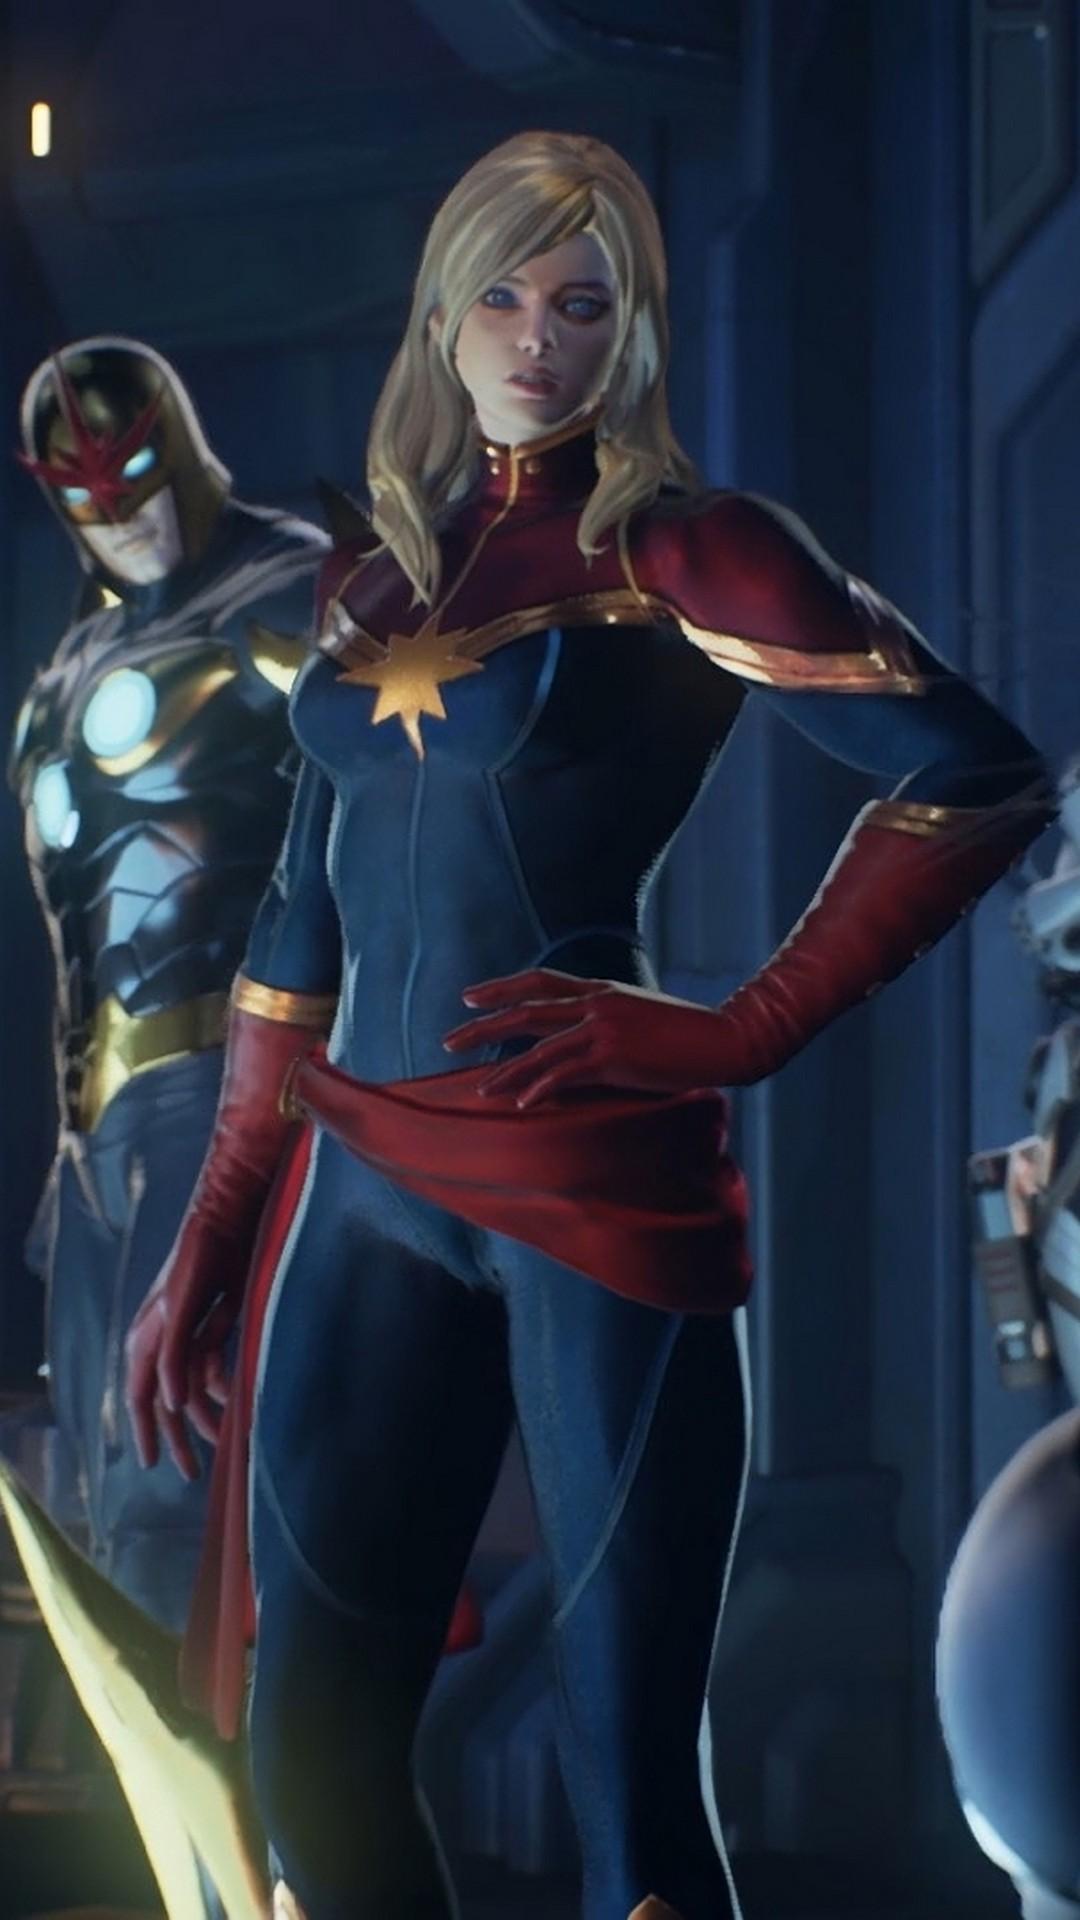 Carol Danvers Blasts Into Space in First Look at 